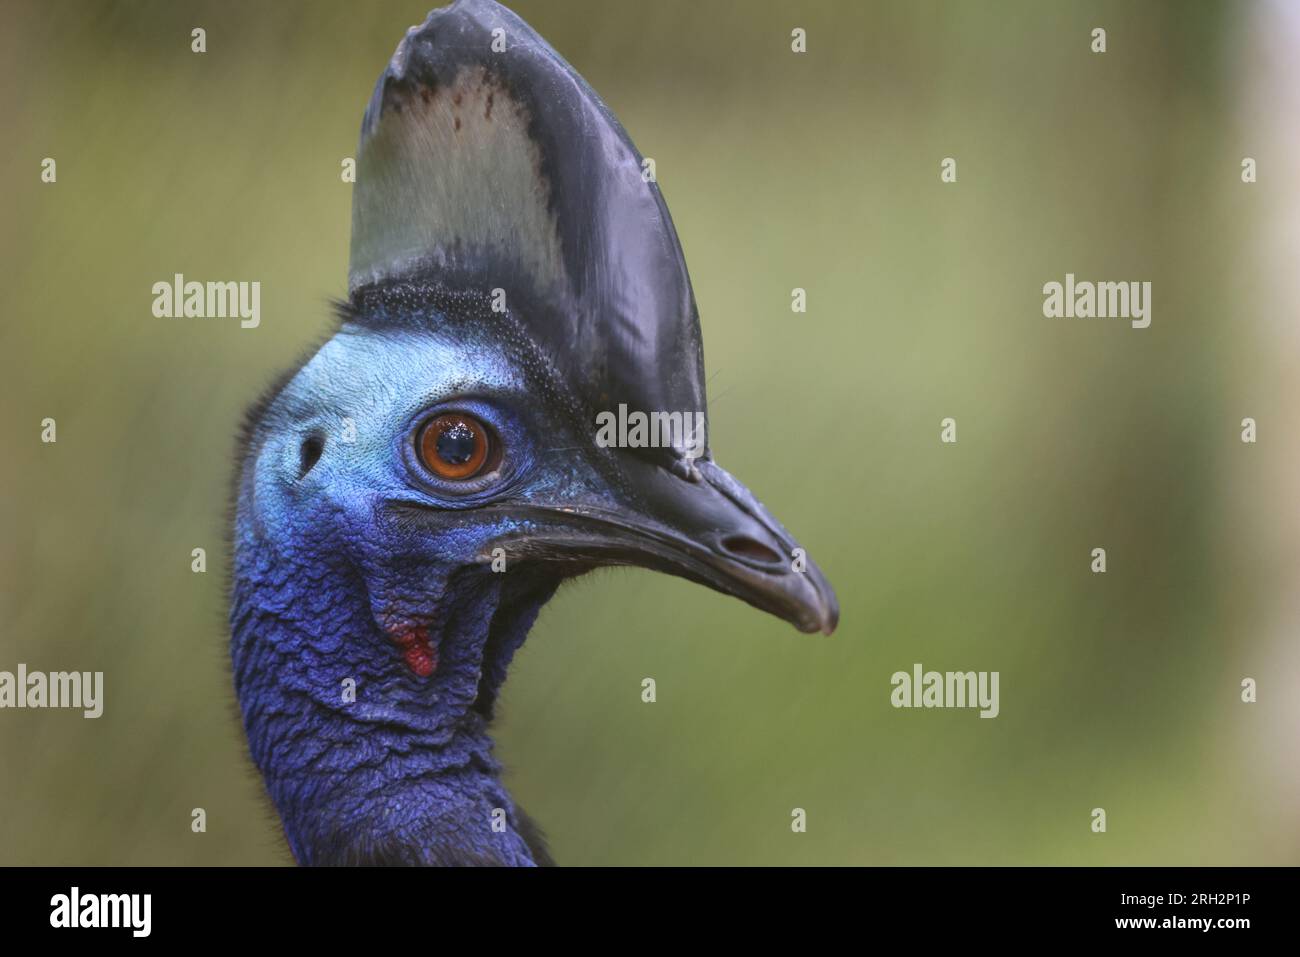 The northern cassowary (Casuarius unappendiculatus) also known as the one-wattled cassowary is a large, stocky flightless bird of northern New Guinea. Stock Photo